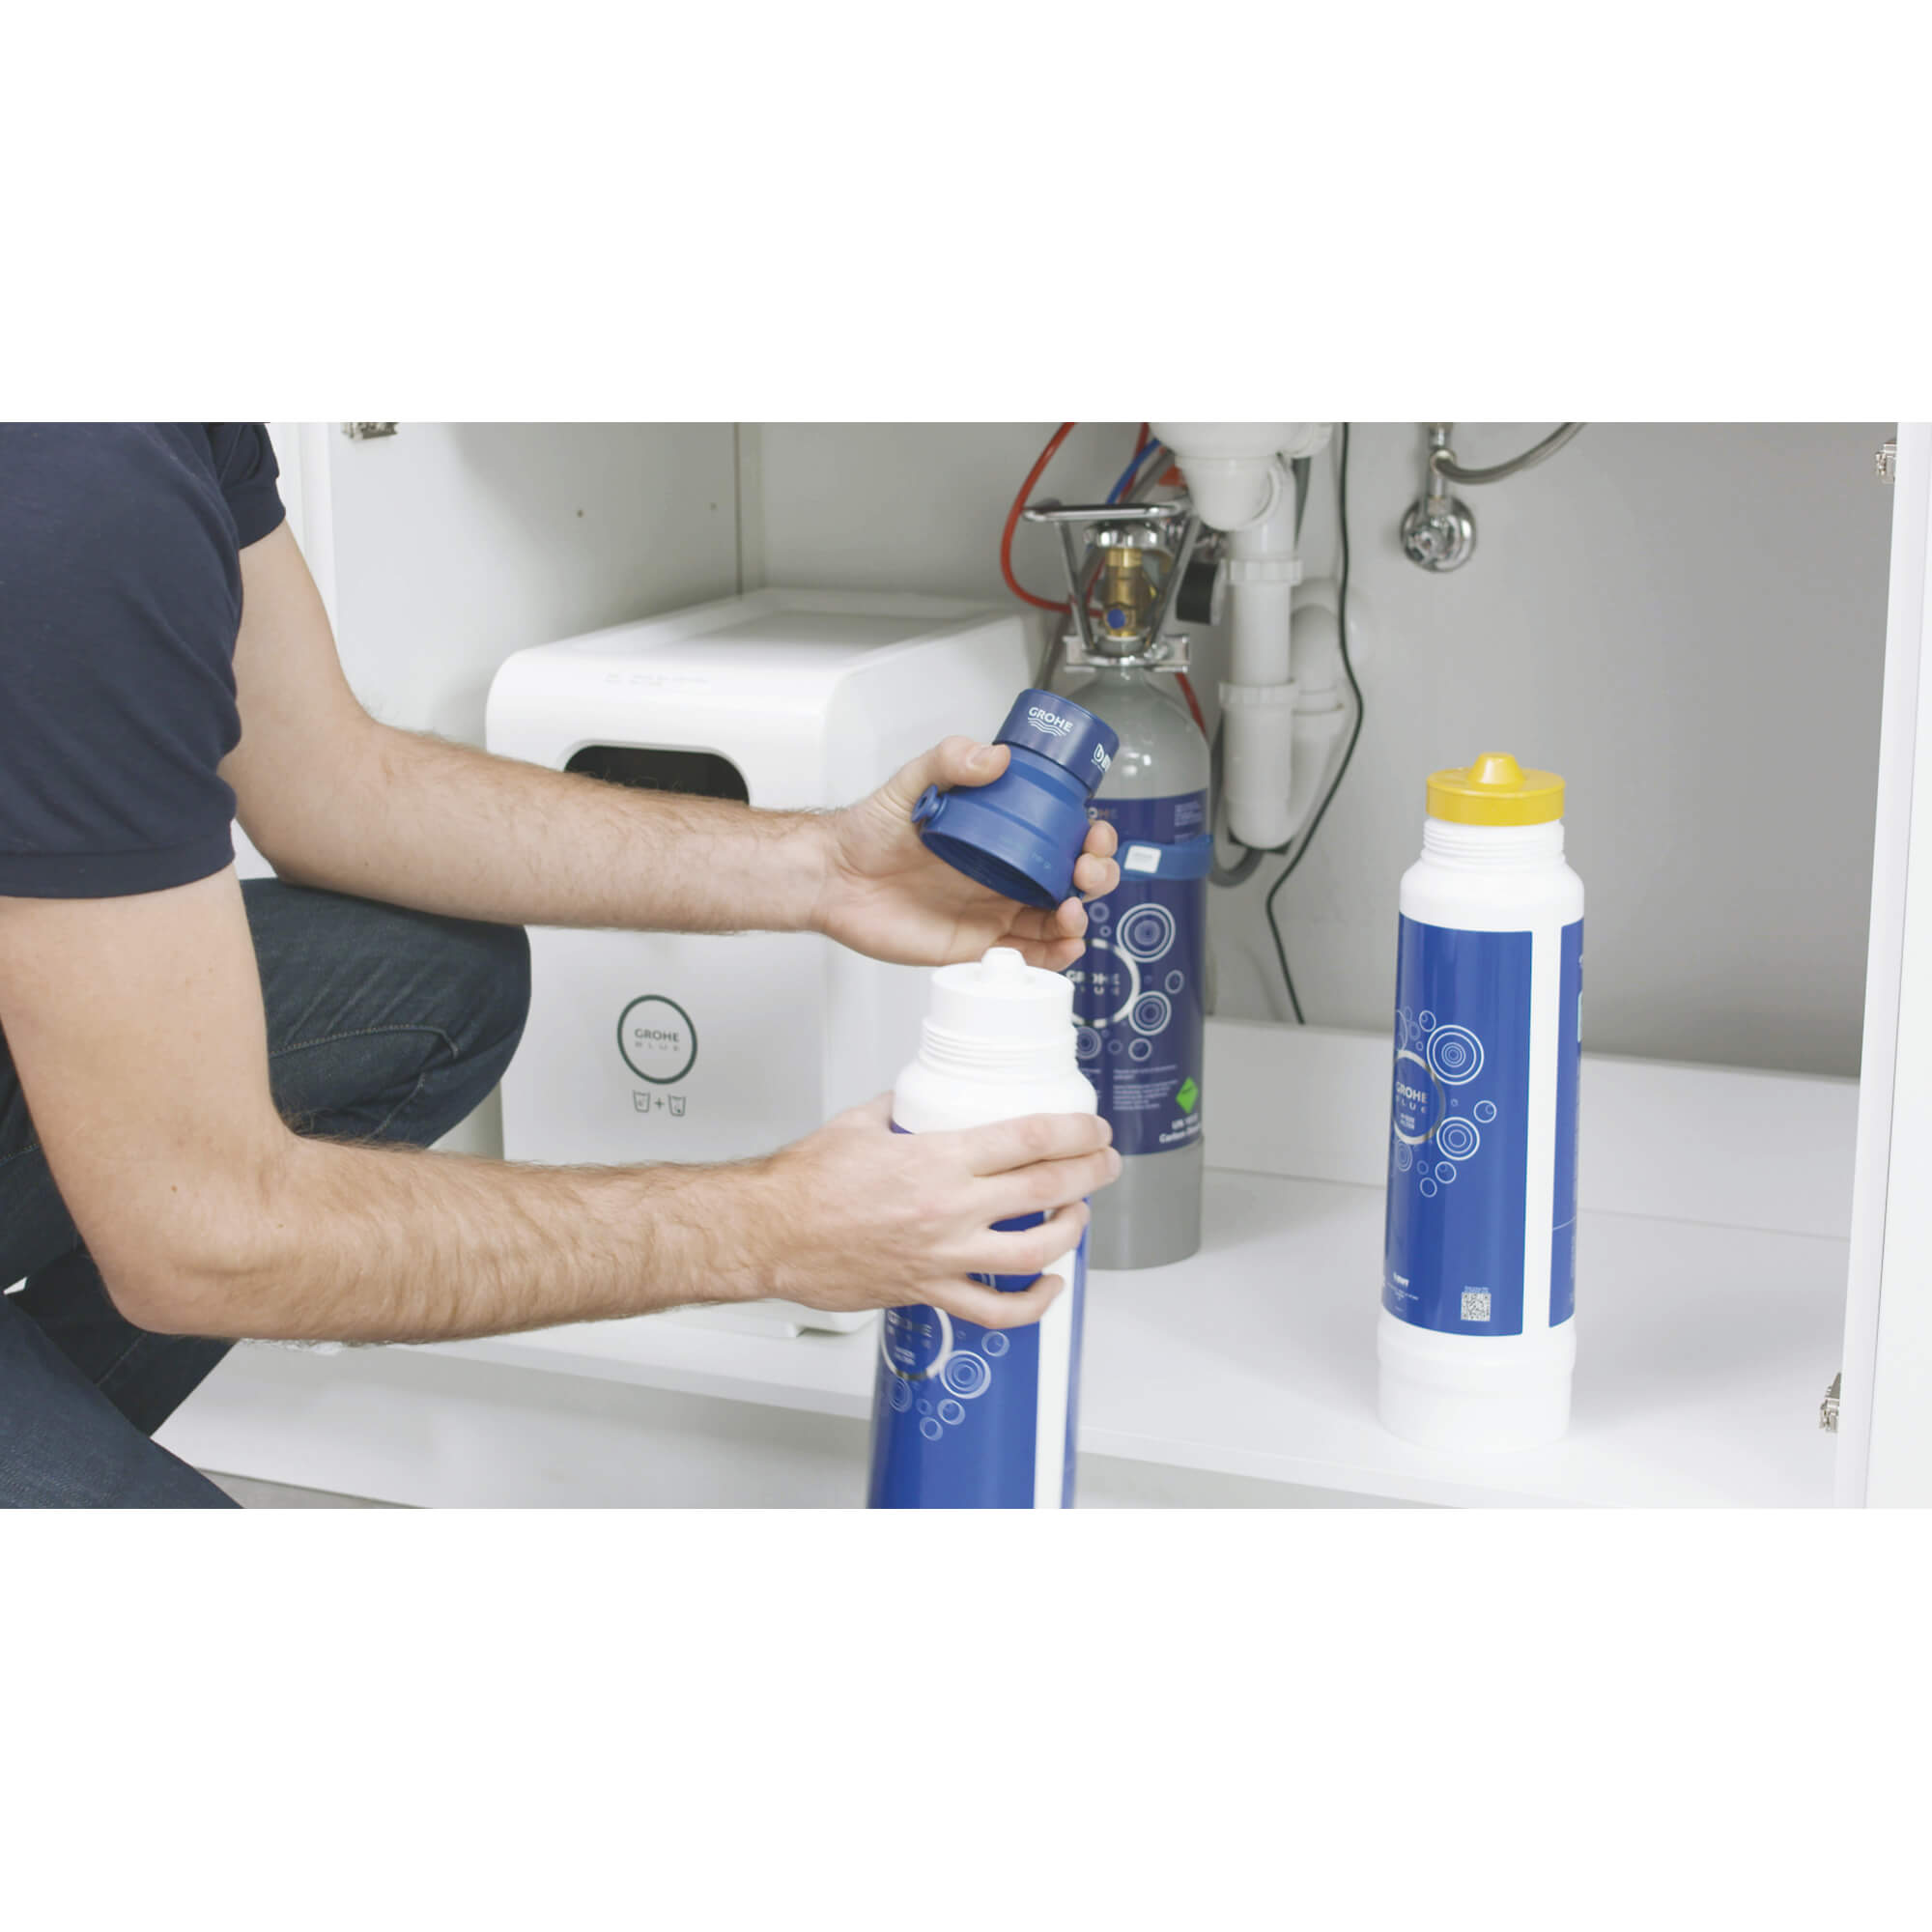 Grohe Blue Filter Carbon Filter For Low Water Hardness